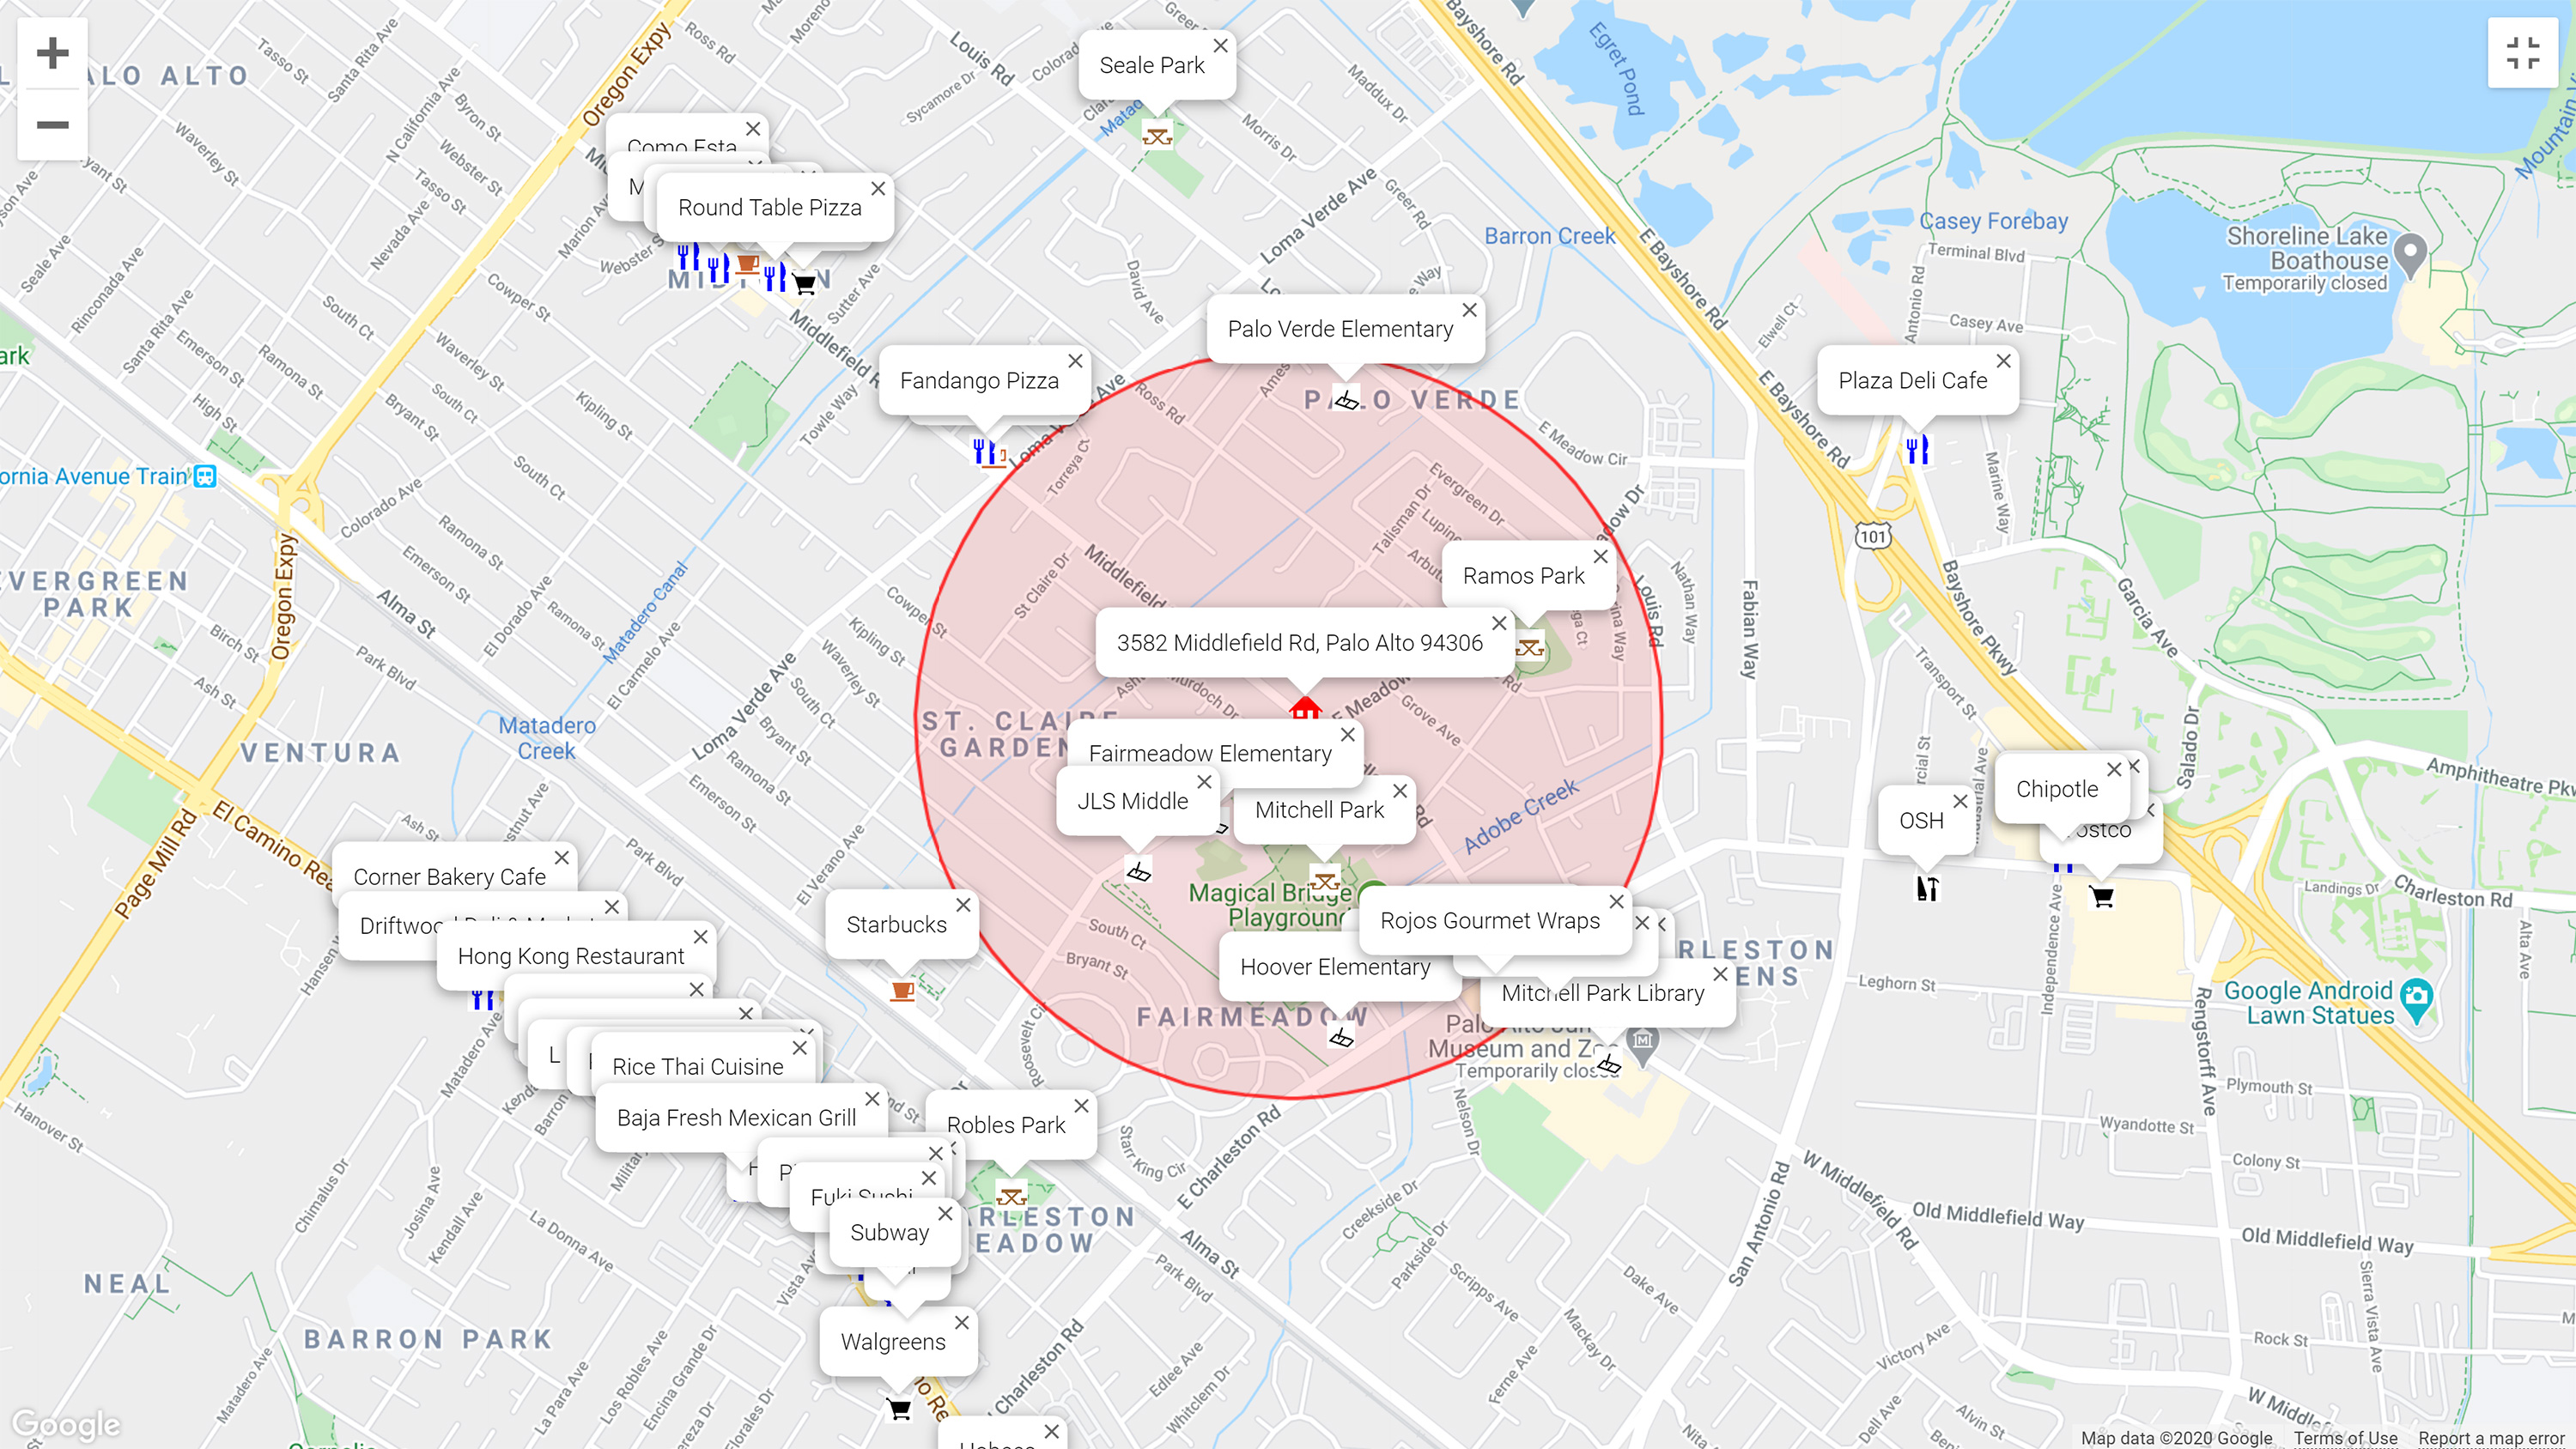 Map of attractions near 3582 Middlefield Rd, Palo Alto 94306